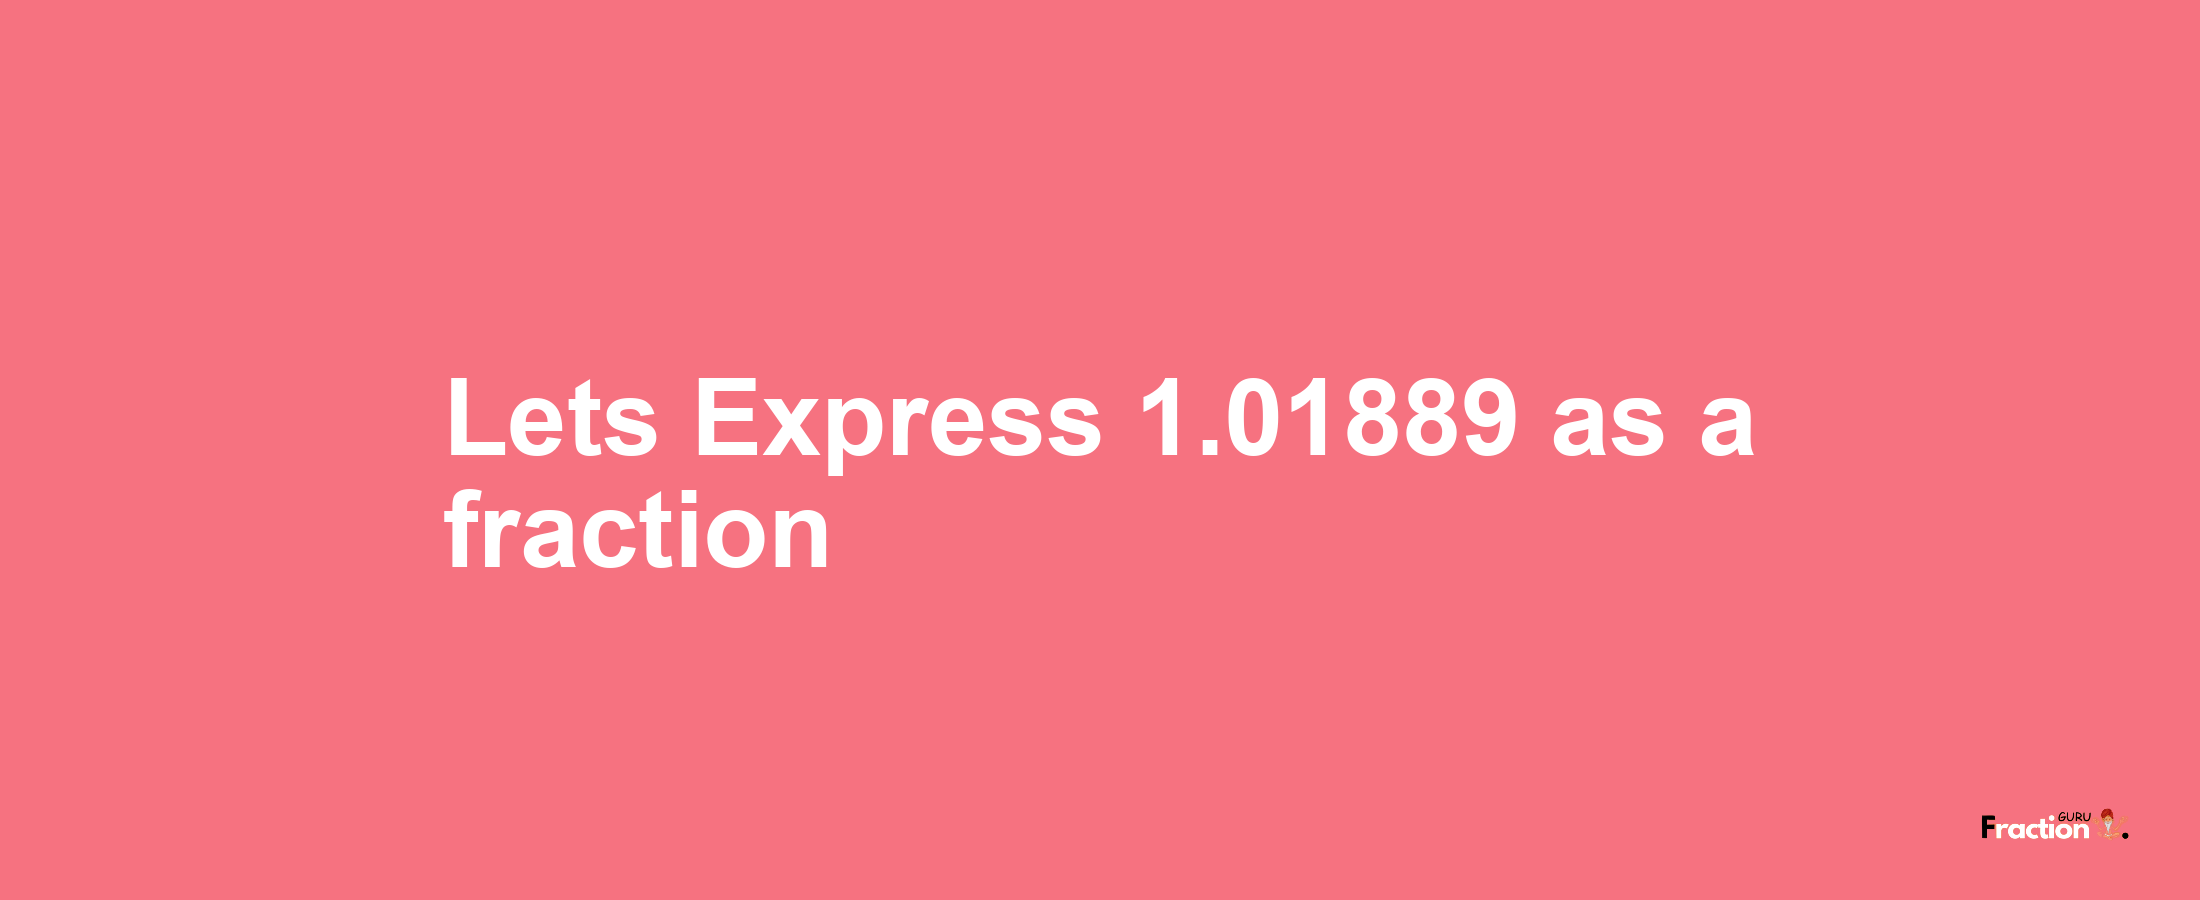 Lets Express 1.01889 as afraction